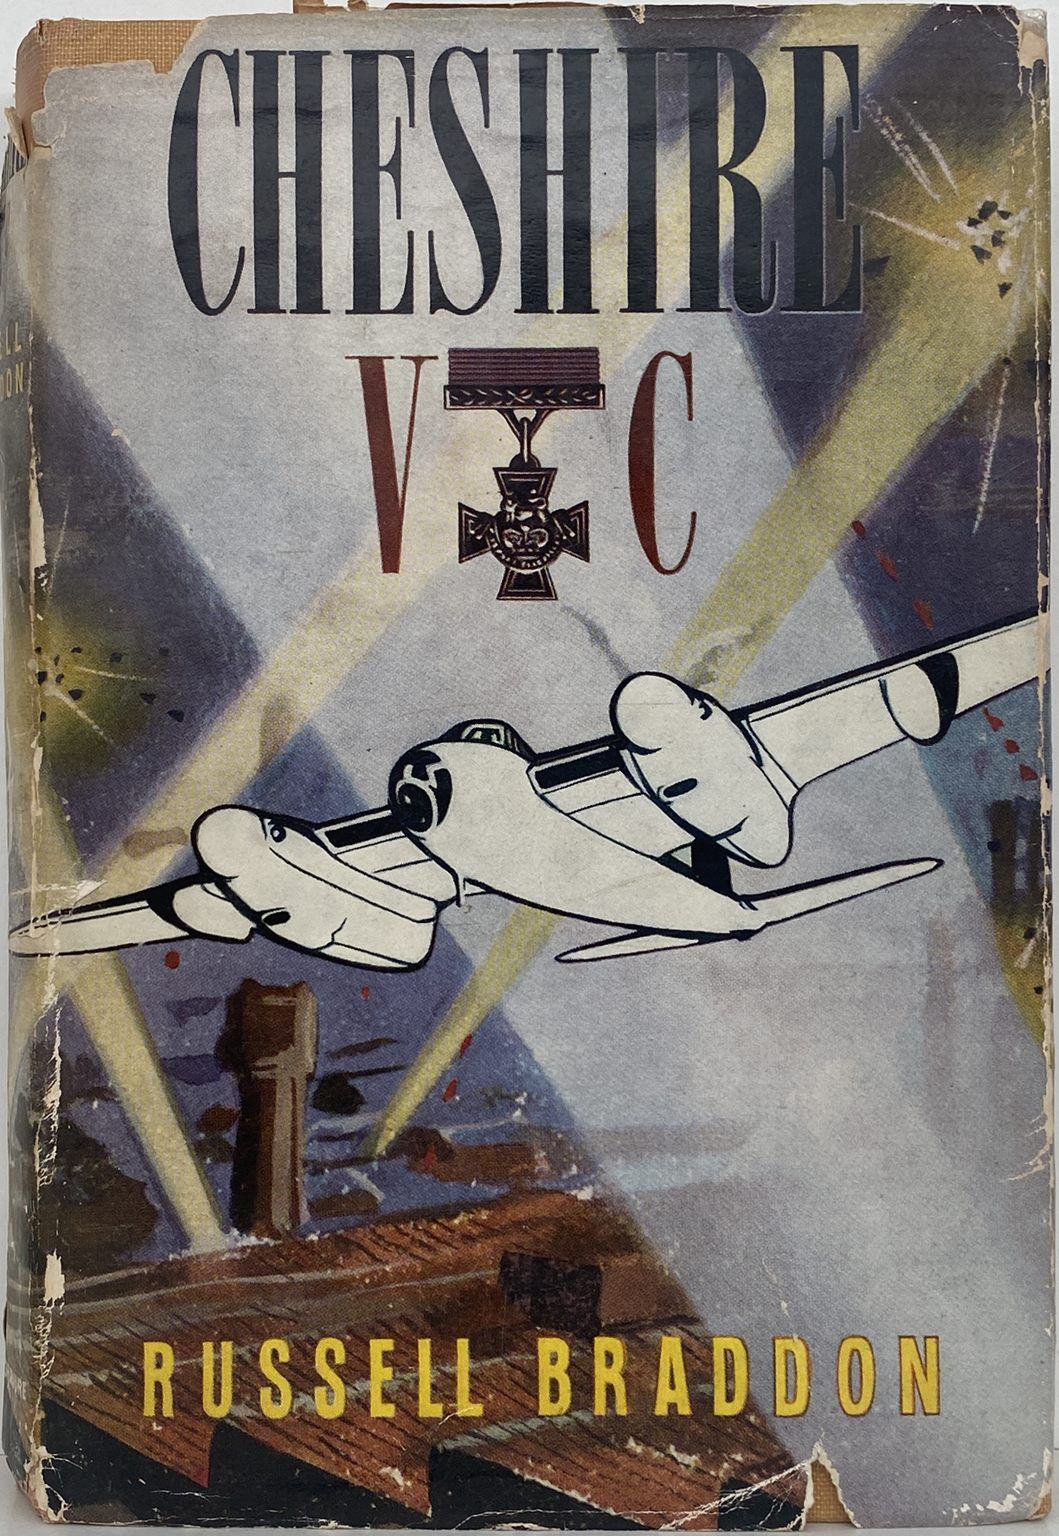 CHESHIRE V.C. - A Story of War and Peace